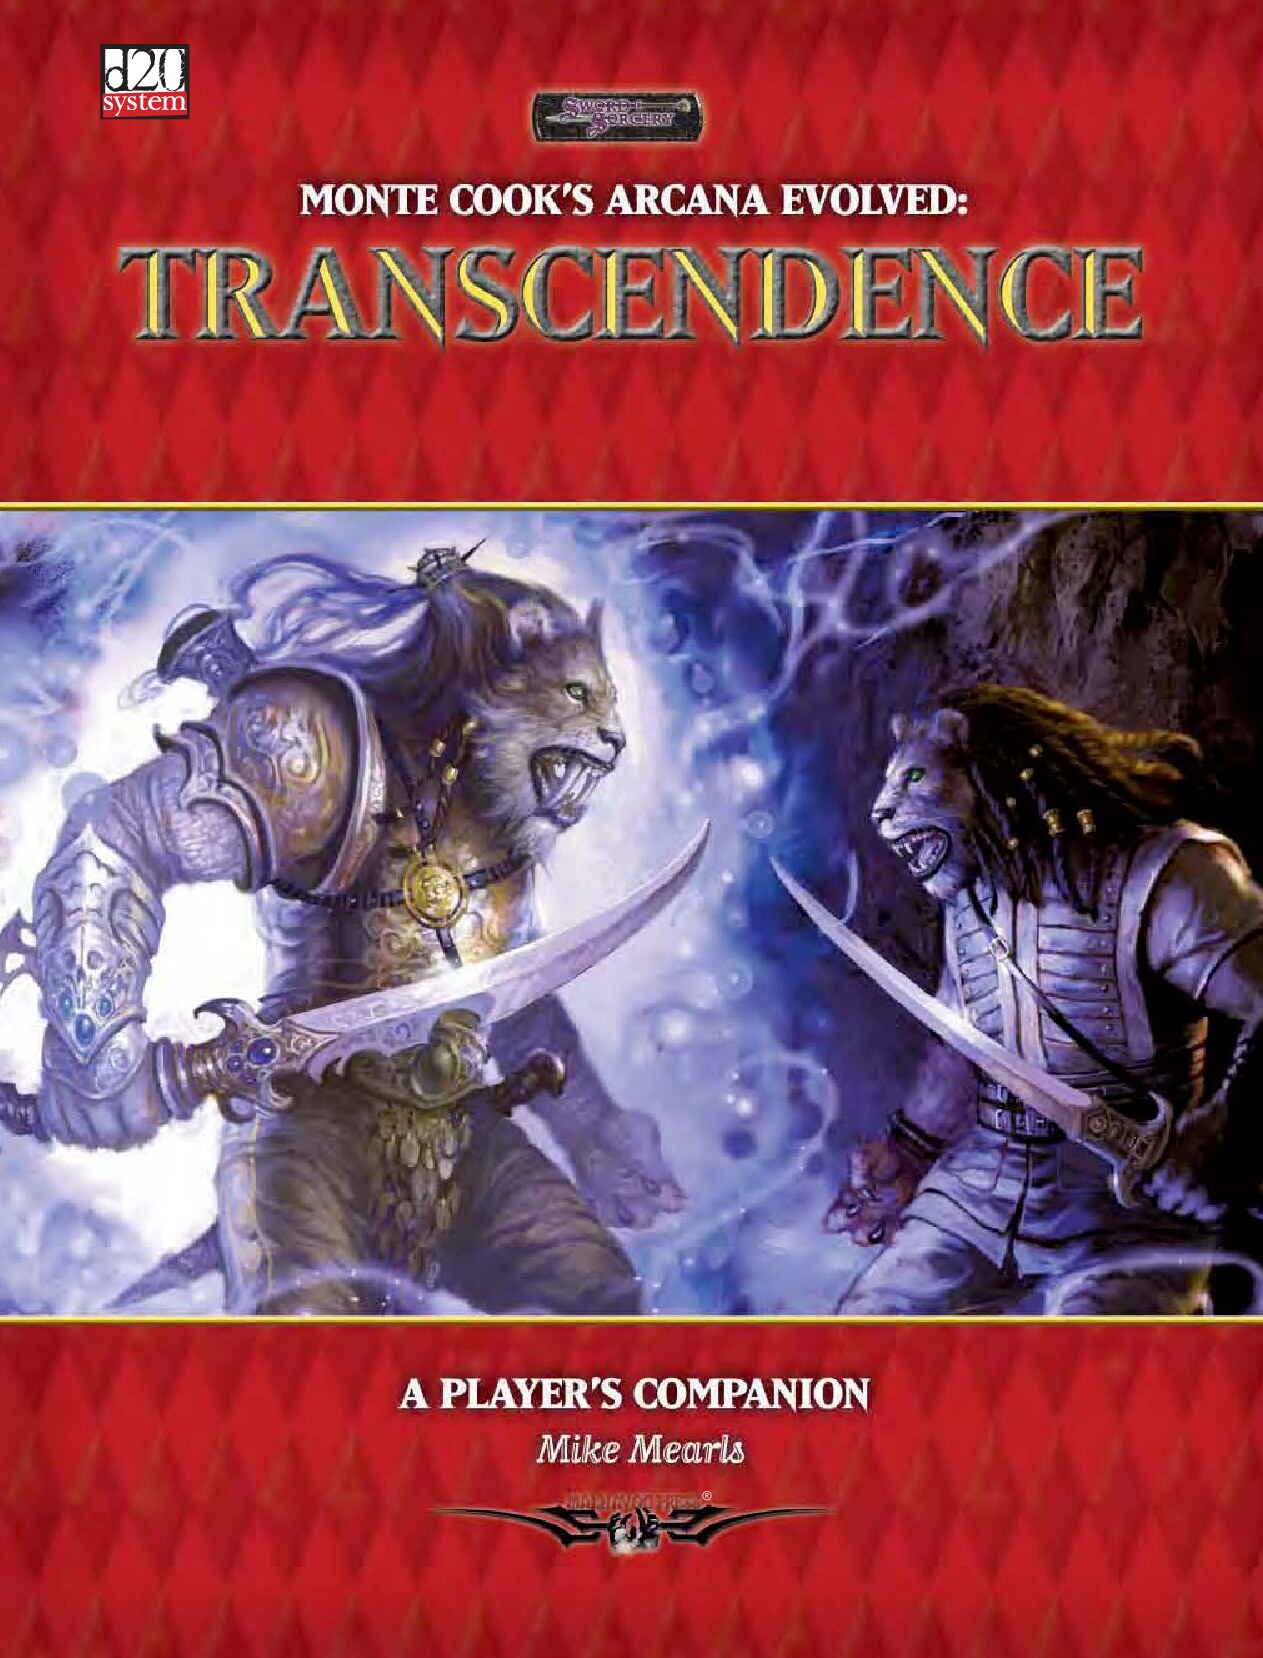 Transcendence. A Player's Companion